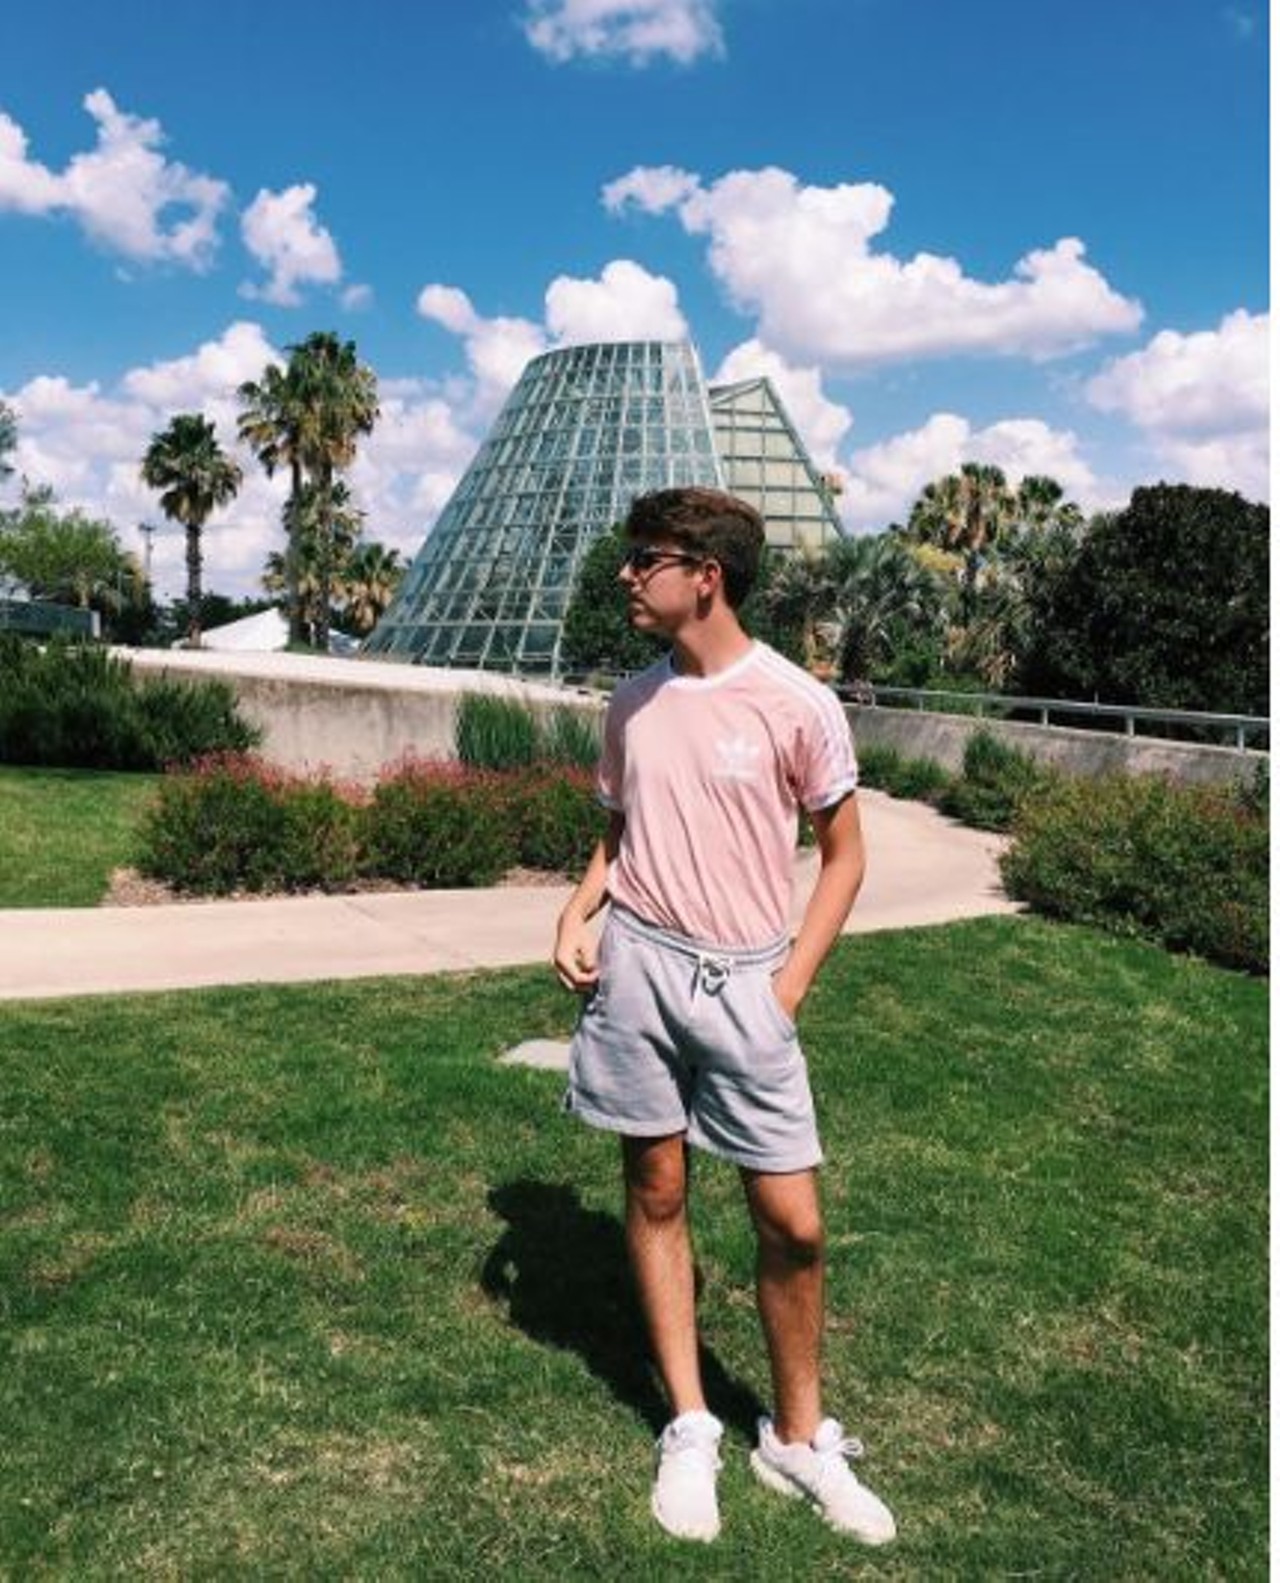 Botanical Gardens
555 Funston Pl.
Want earthy vibes as your next Instagram theme? Check out the Botanical Gardens to achieve the perfect aesthetic.
Photo via Instagram _jakedial_